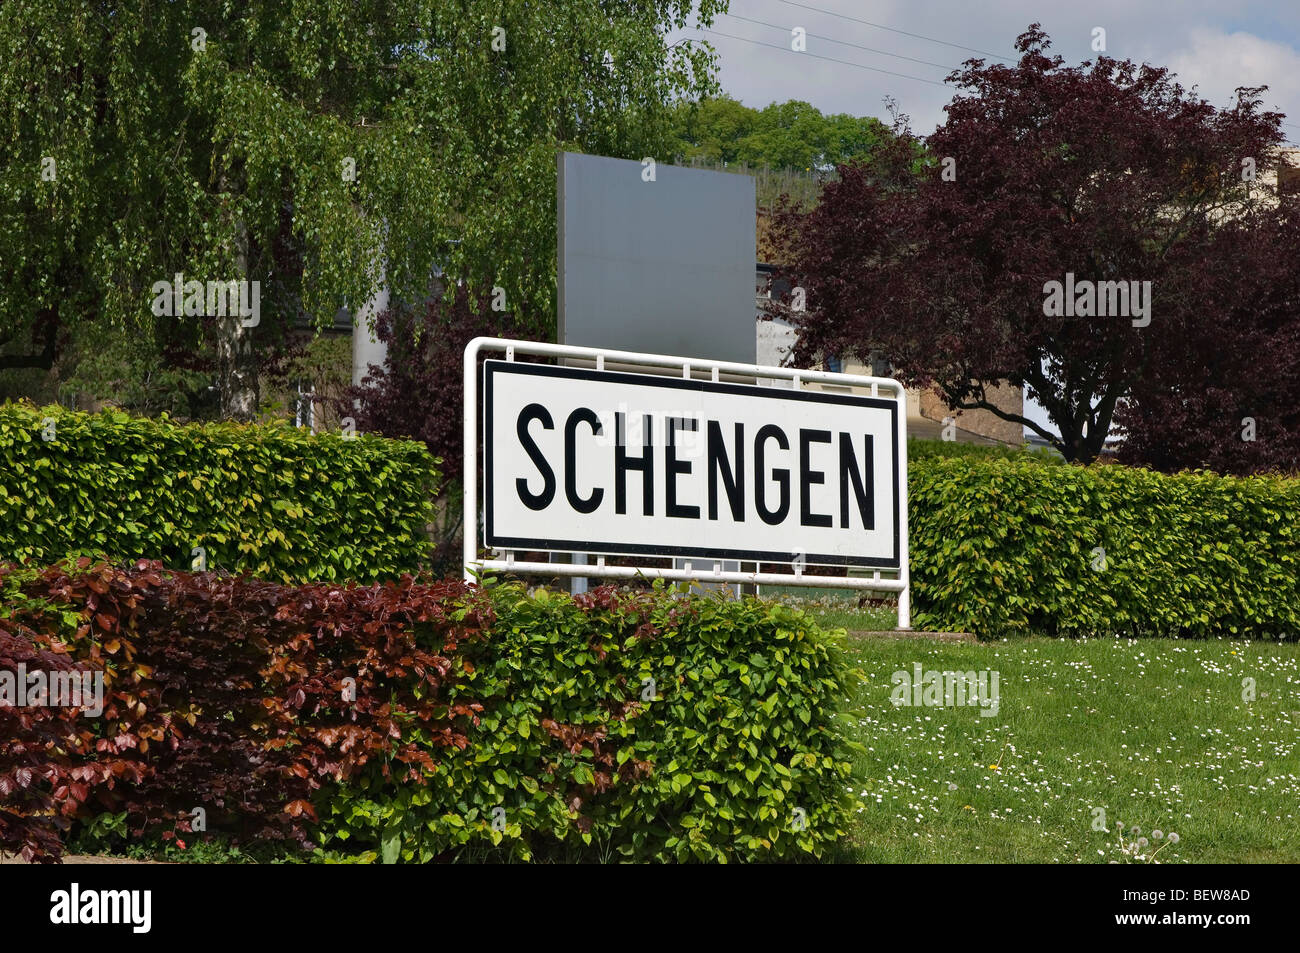 Place-name sign of Schengen in front of hedge, Schengen, Luxembourg Stock Photo